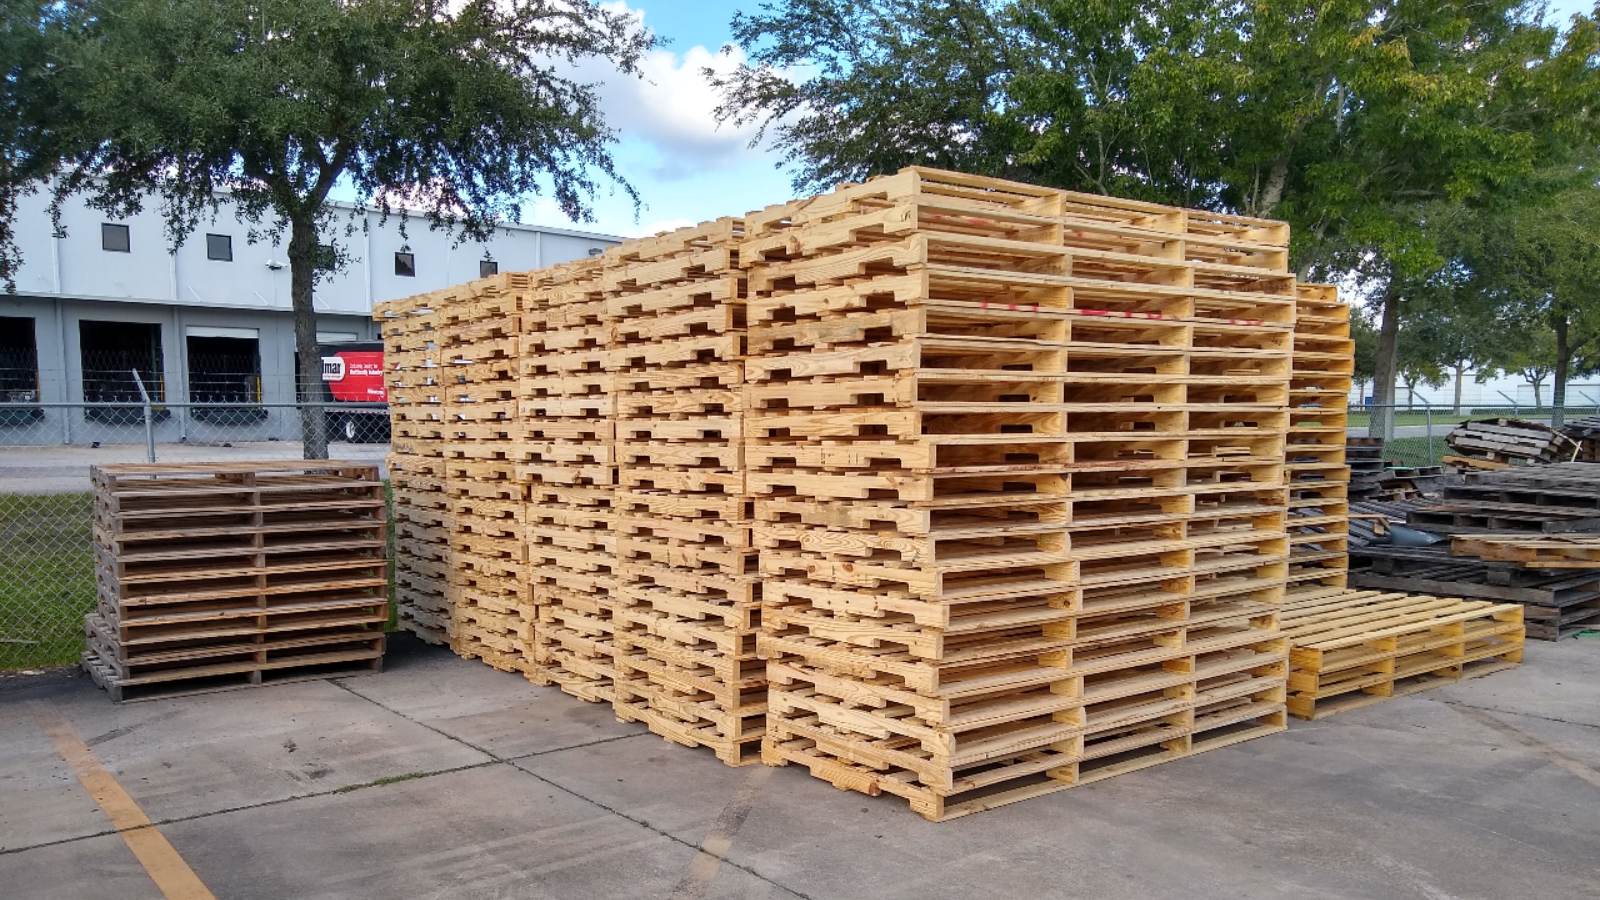 View of stacked pallets - Pallet Management Services in Altamonte